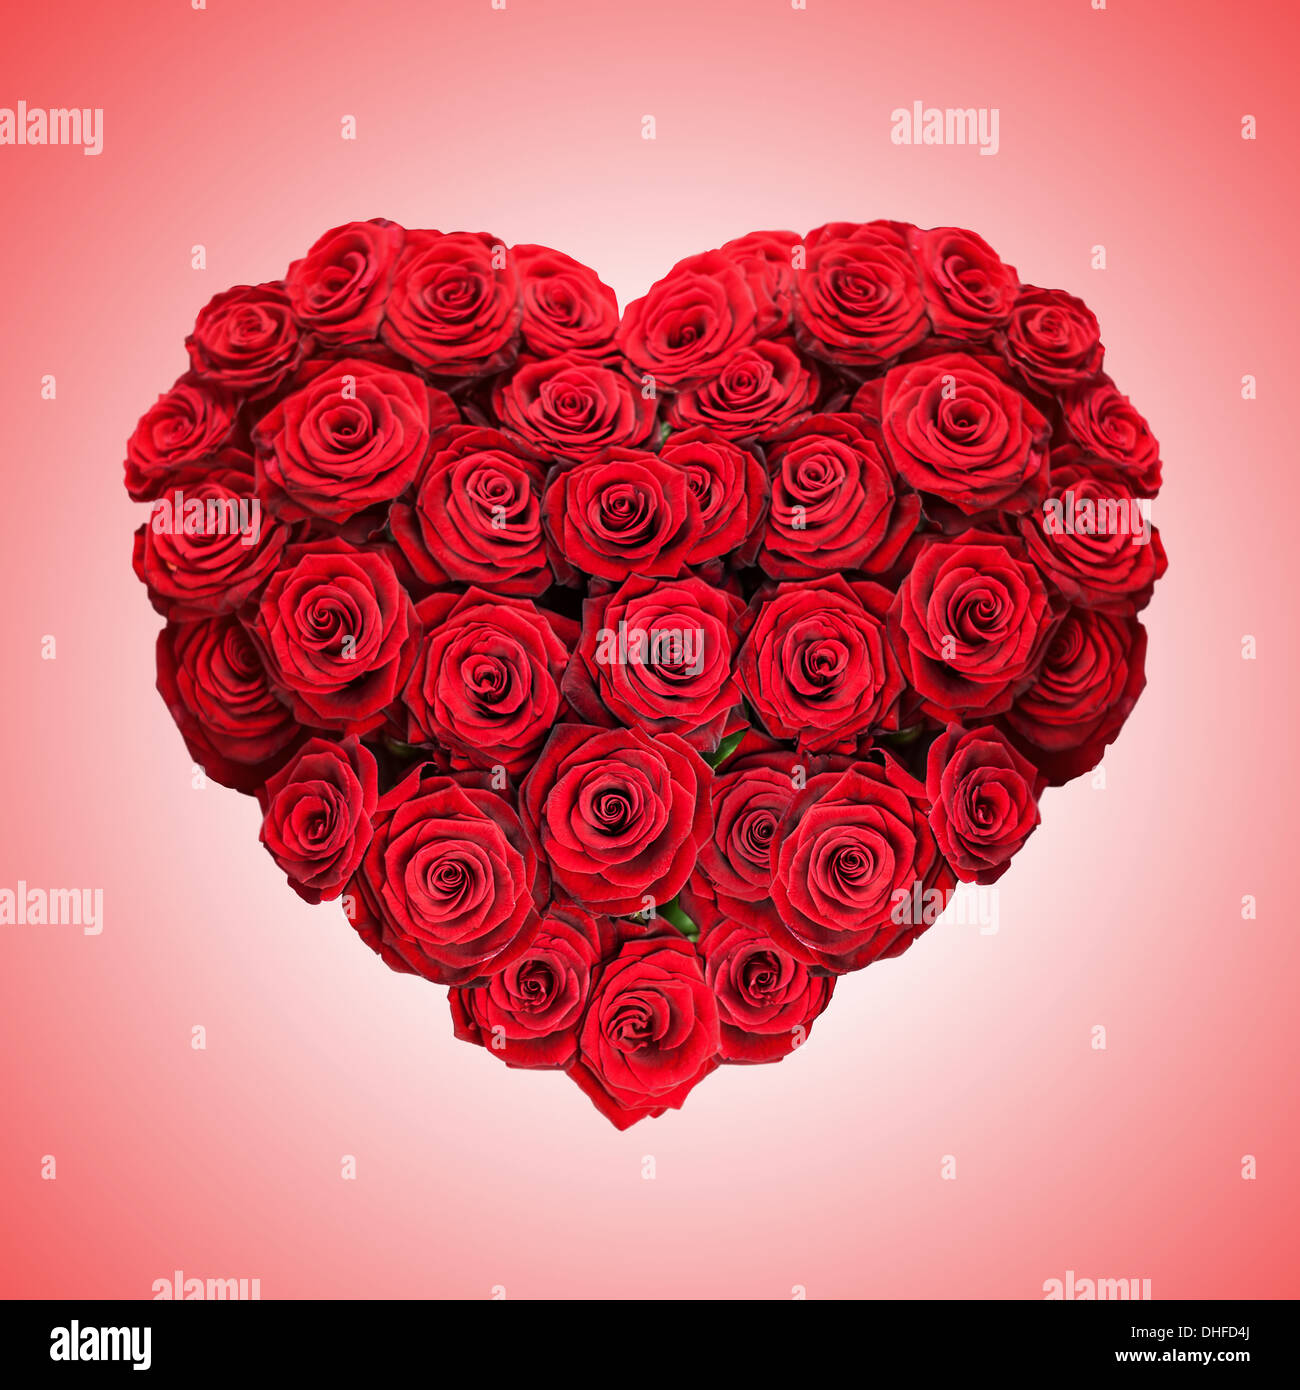 red rose heart on pink background Stock Photo